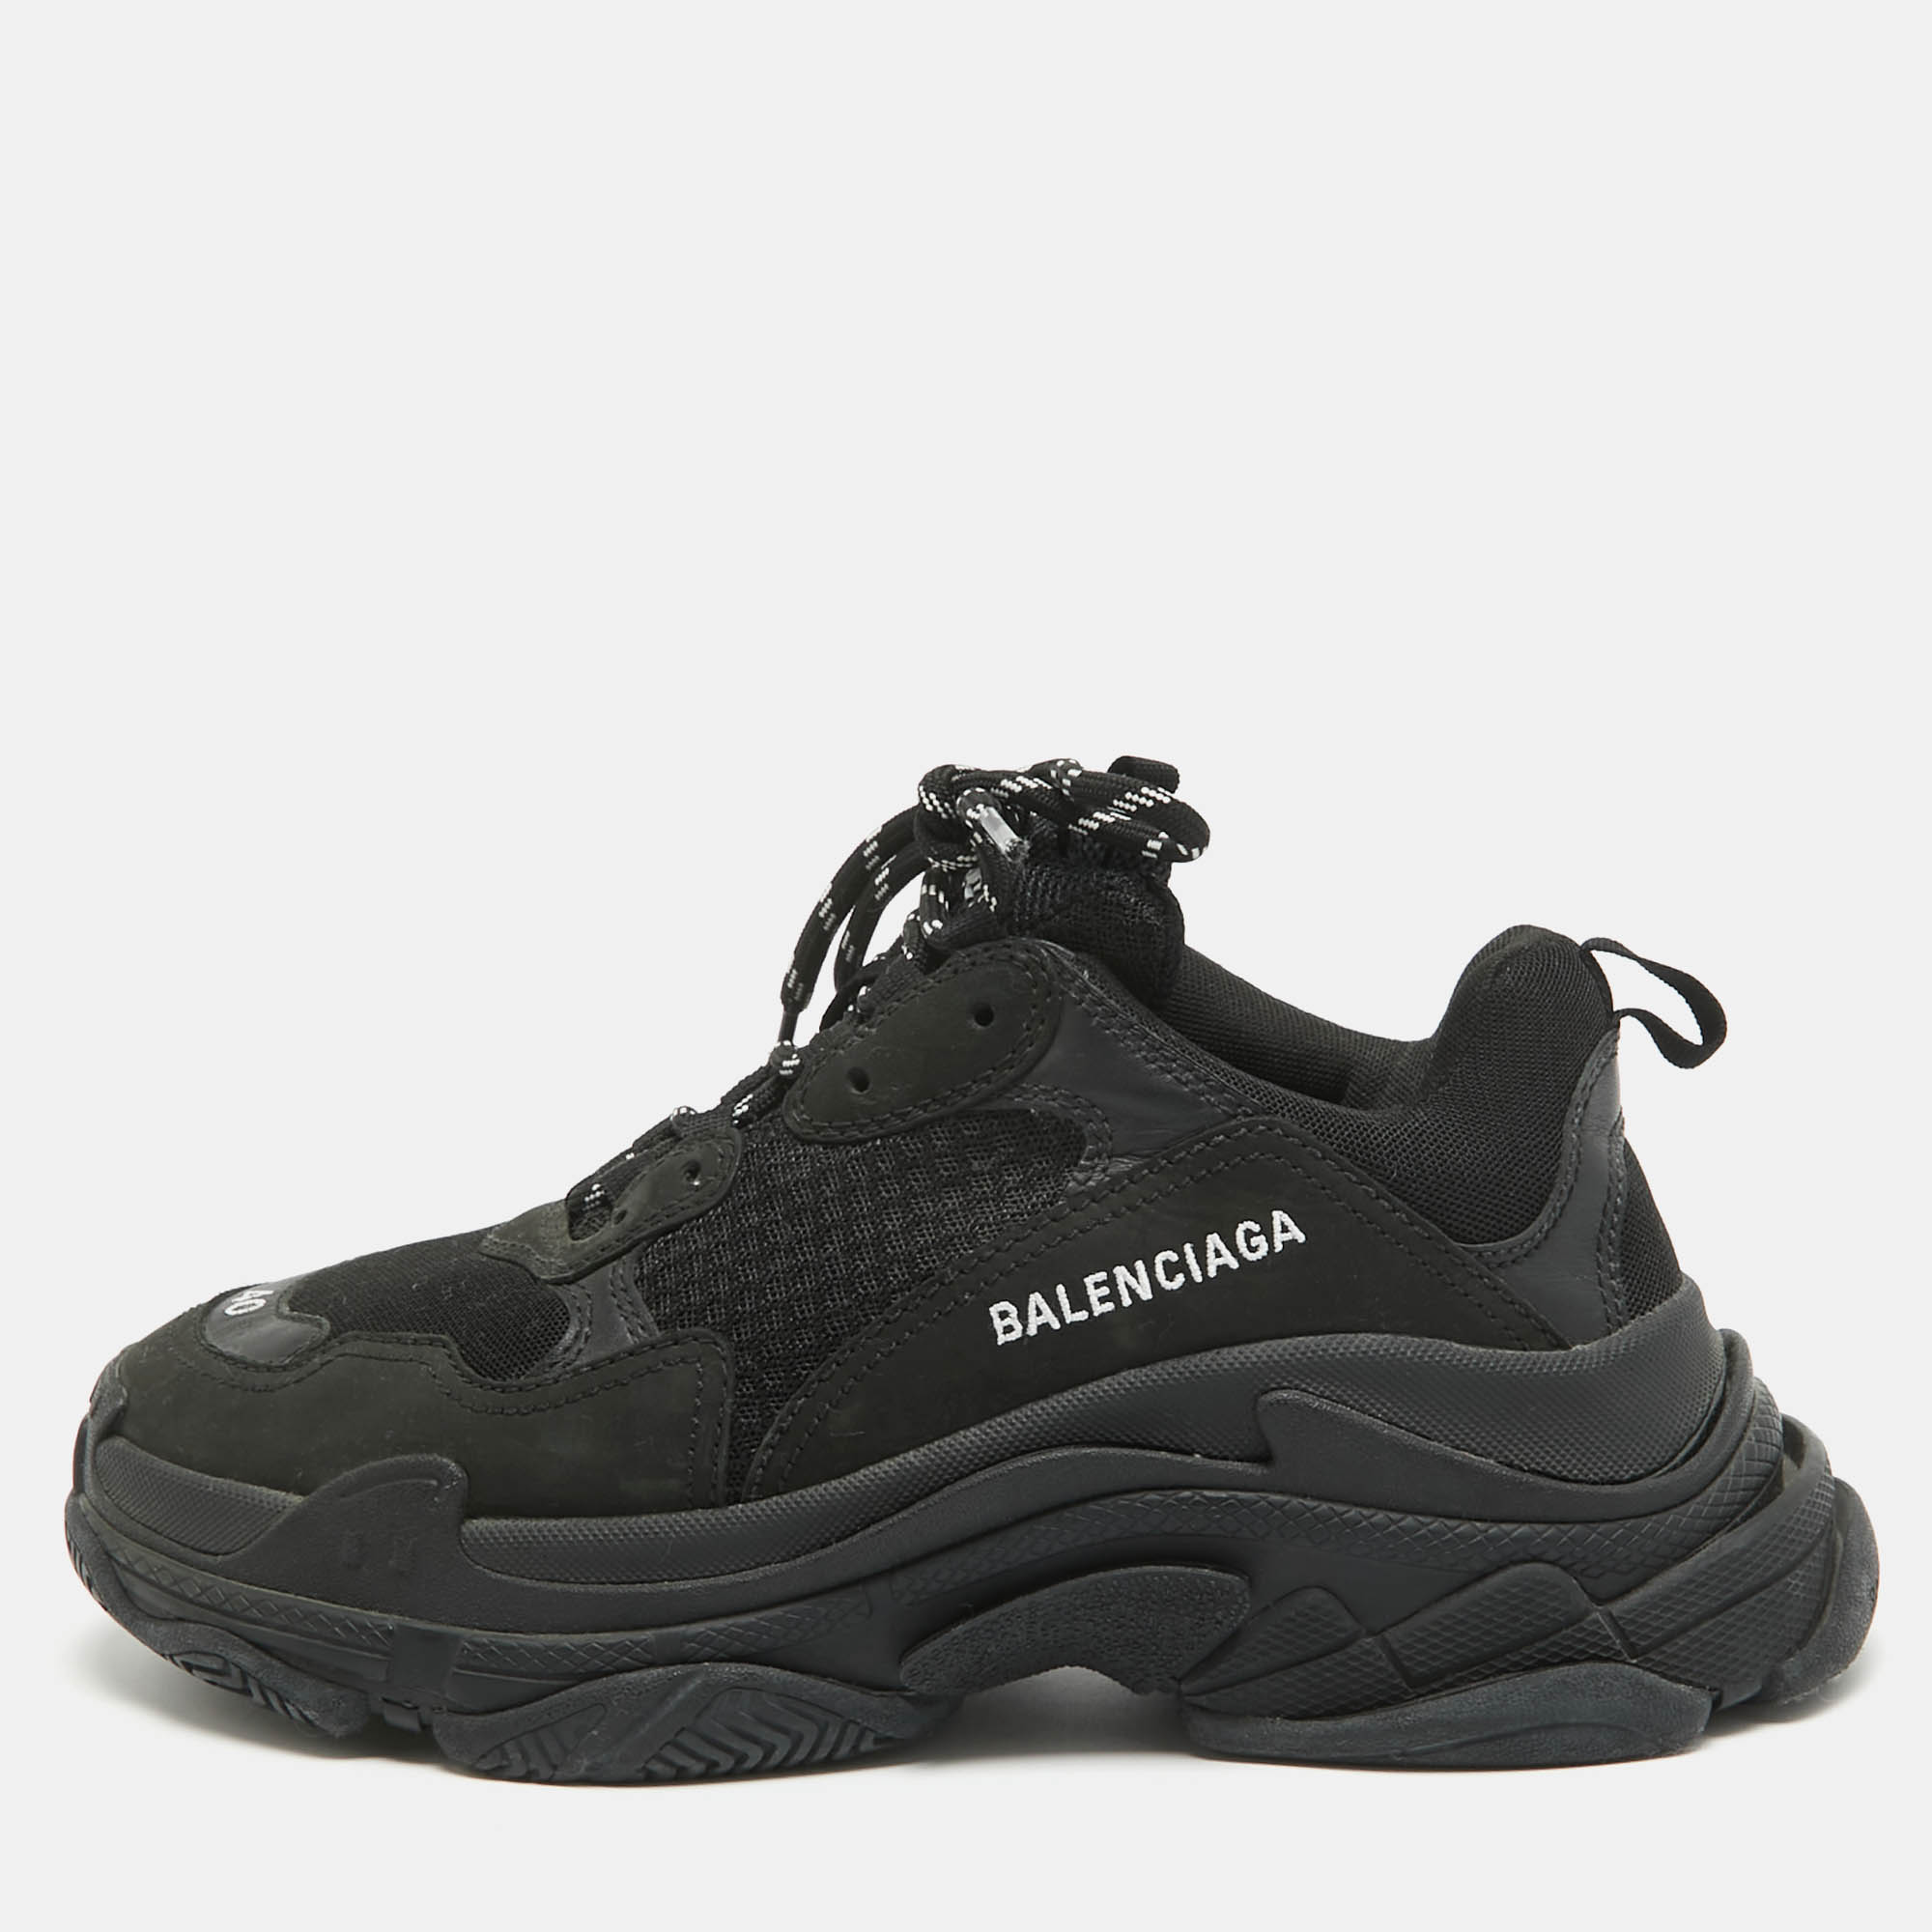 With durable construction these Balenciaga sneakers will lend you a stylish modern look. The rubber soles of this pair will provide you with optimum grip while walking. Made from leather mesh and nubuck leather these shoes get a luxe update with a brand signature on the sides and are equipped with lace up vamps.